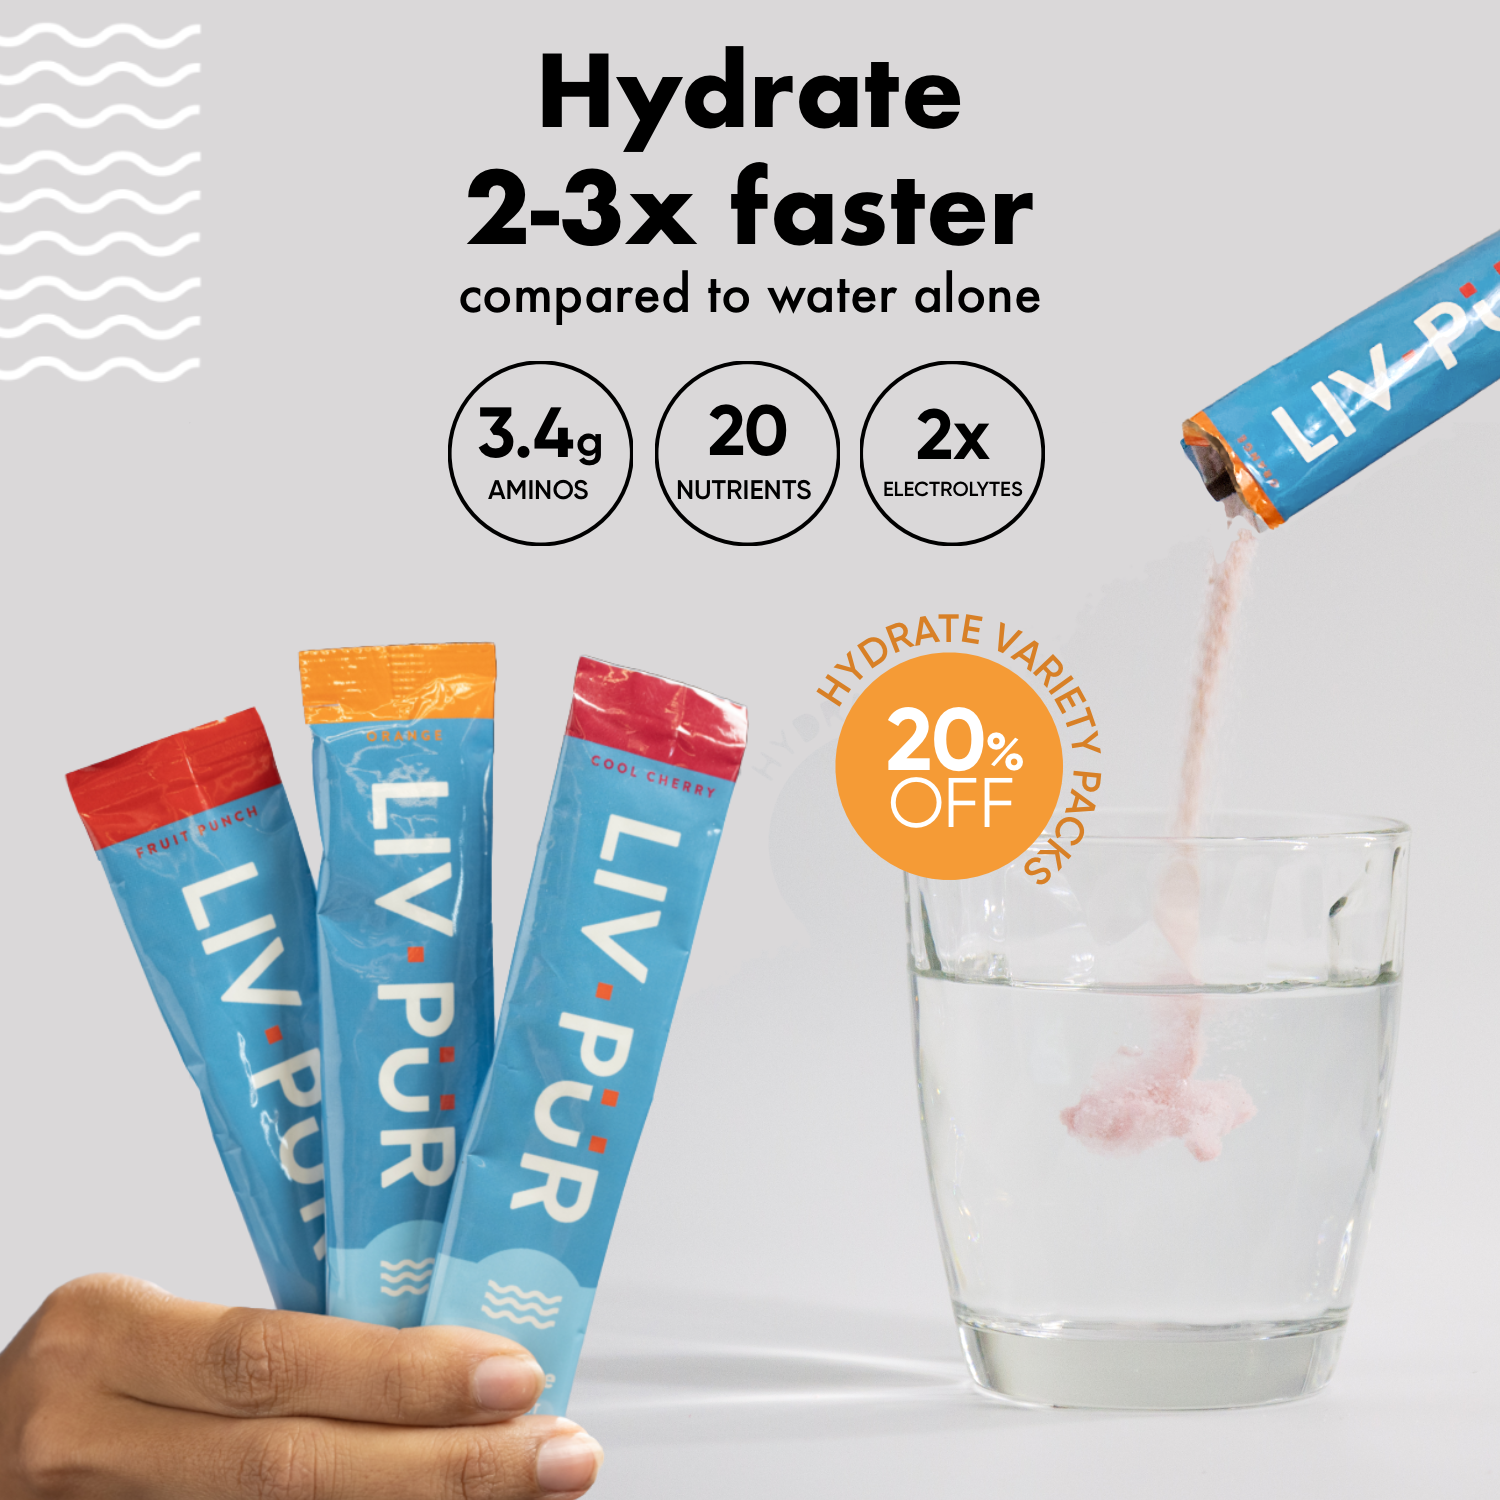 Hydrate 2-3x faster compared to water alone